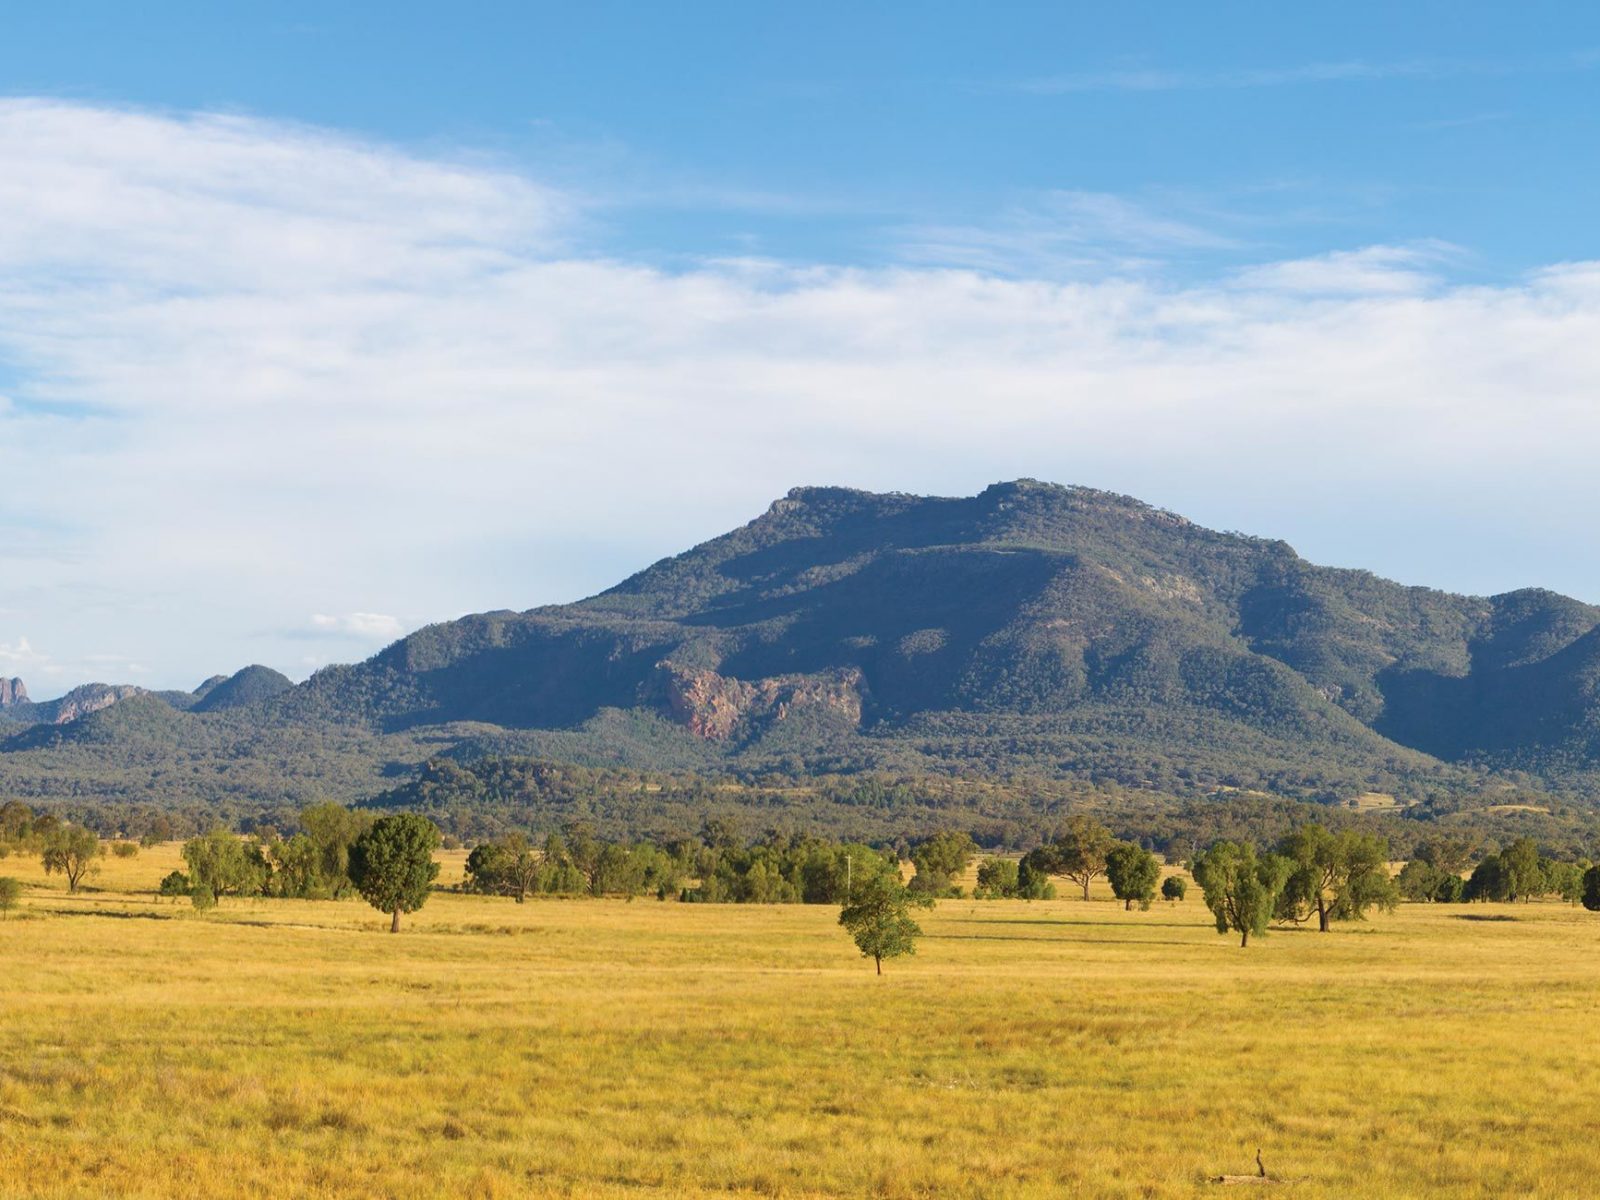 Mountains and plains in Coonabarabran, off Tooraweenah drive in Warrumbungle National Park